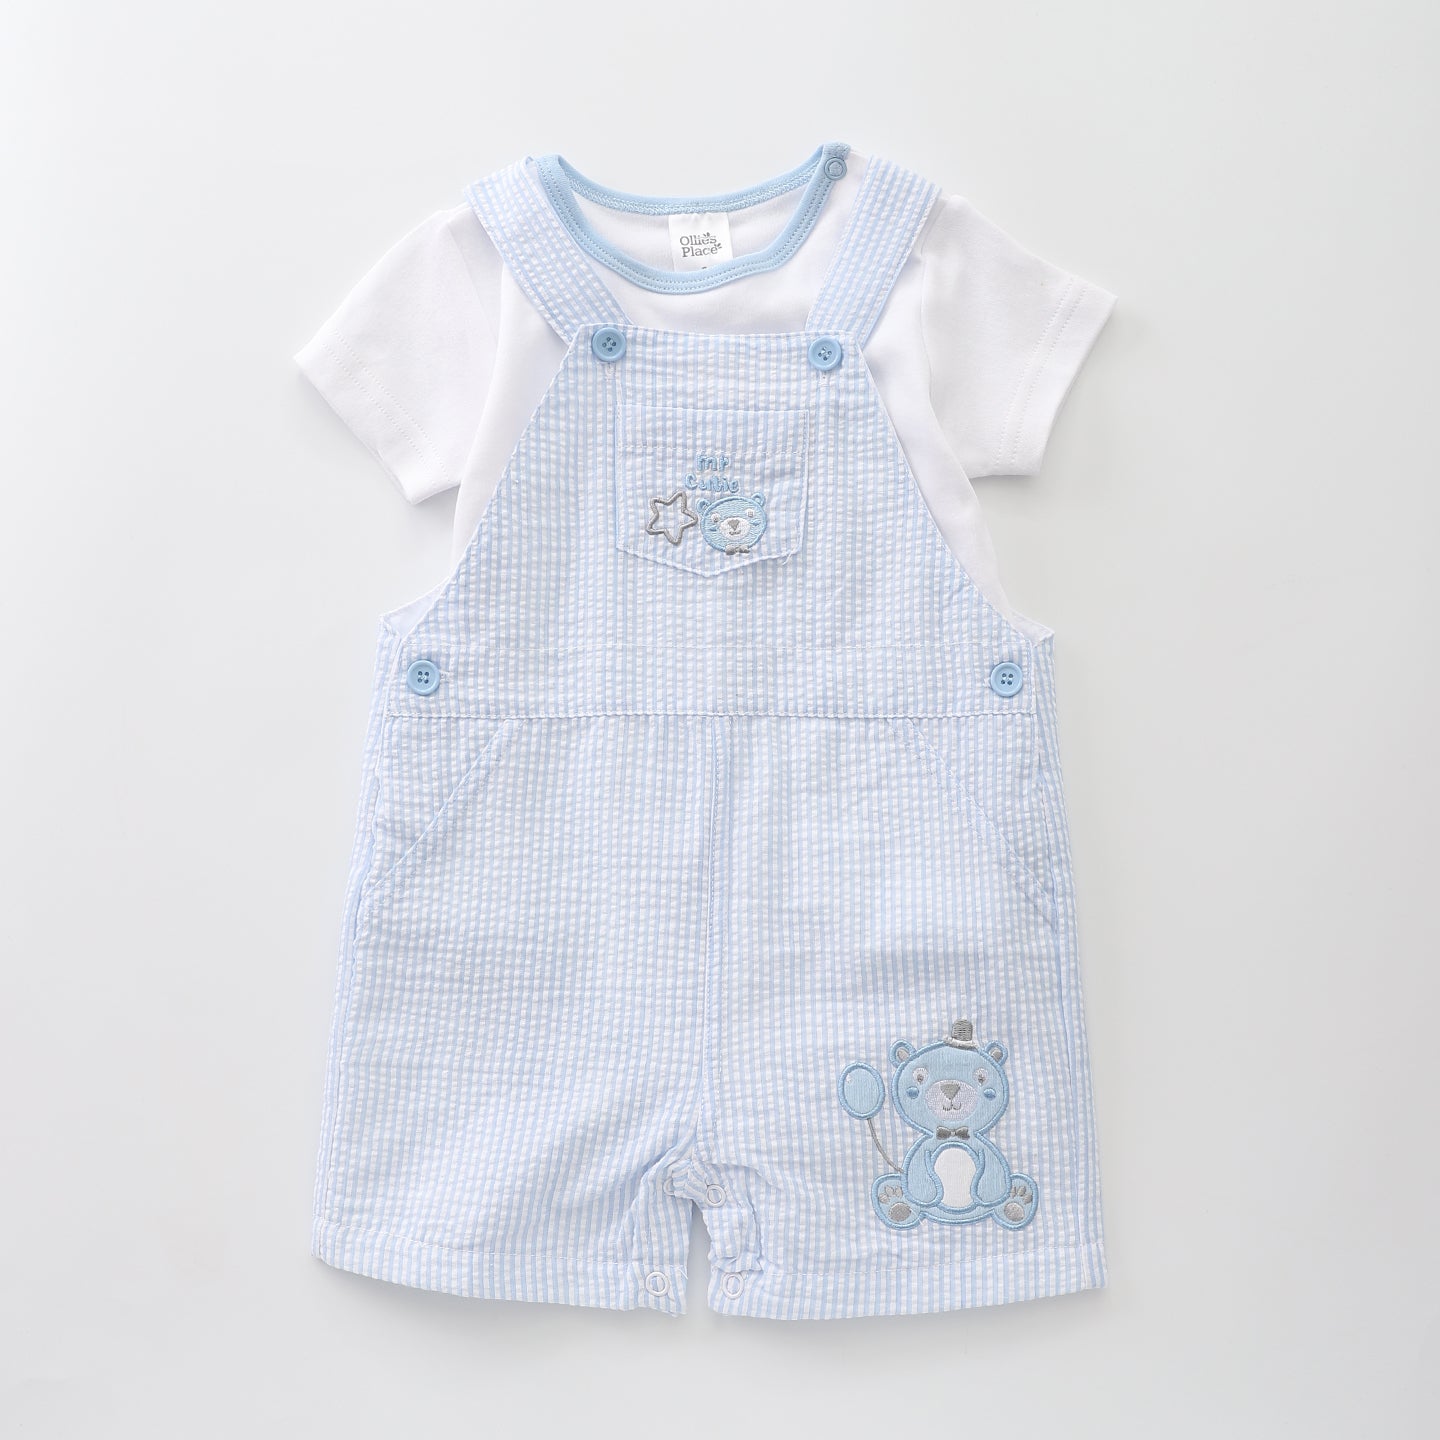 Blue and White Summer Overall